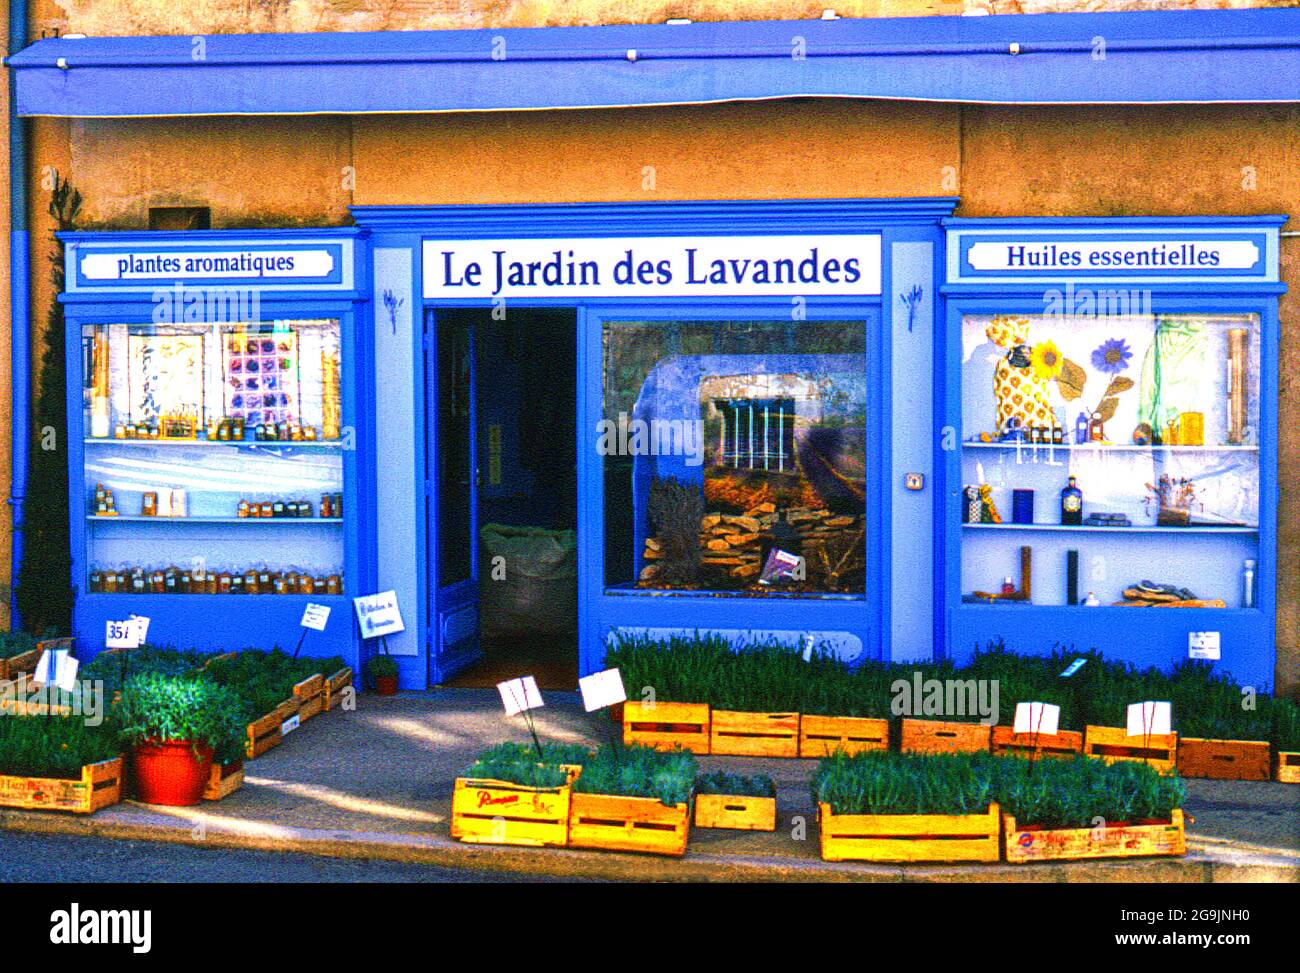 Le Jarden des Lavandes (The Garden of Lavender) in the town of Sault in the region of Provence-Alpes-Côte d'Azur, France Stock Photo